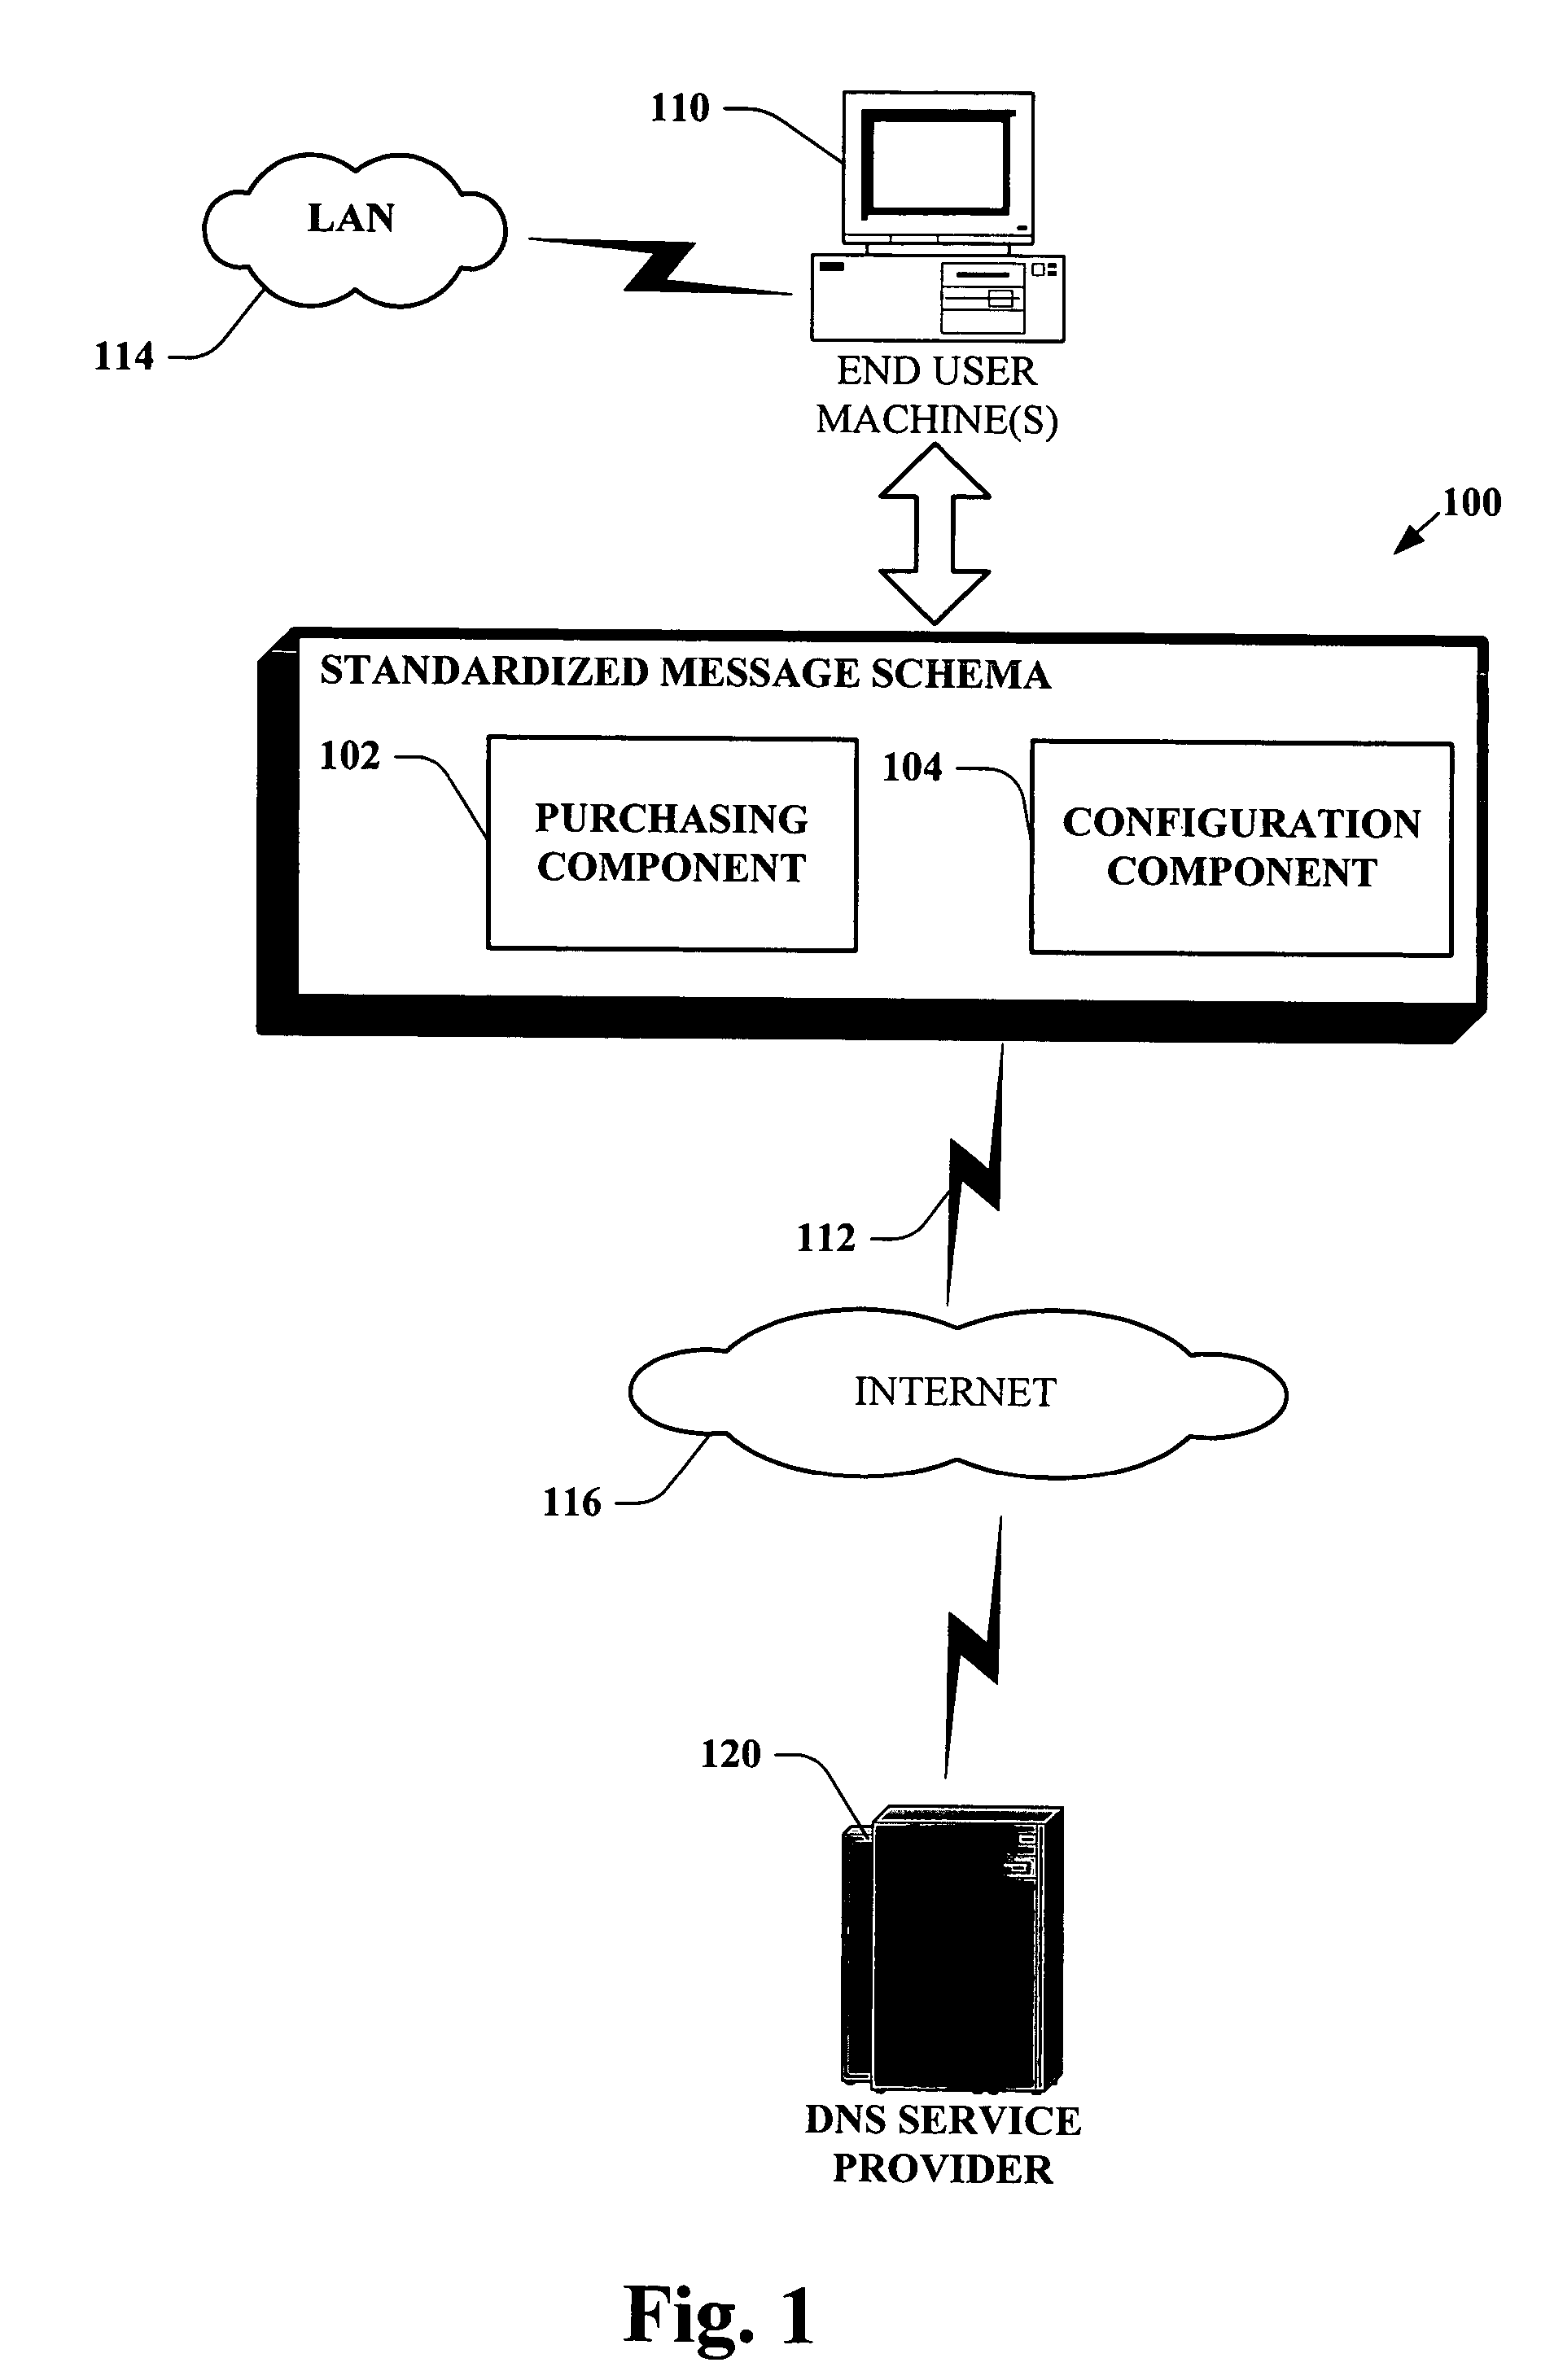 Message based network configuration of domain name services